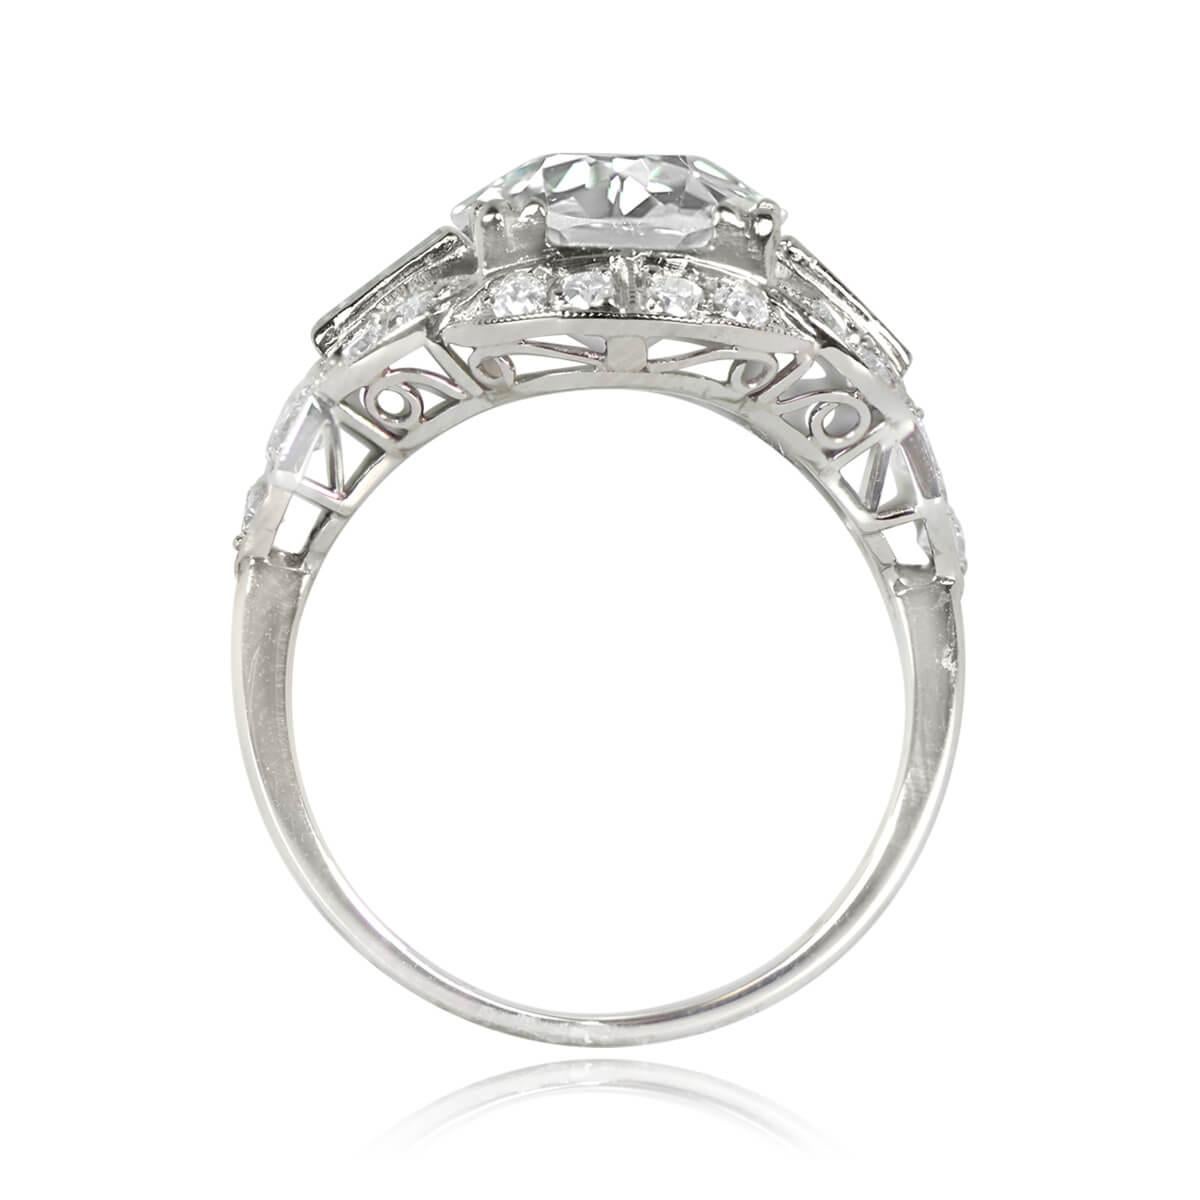 This exquisite ring showcases a 2.81-carat old European cut diamond with K color and VS1 clarity, elegantly secured in prongs. Accompanying the center stone, baguette-cut diamonds are artfully placed on either side, oriented east-west. An enchanting